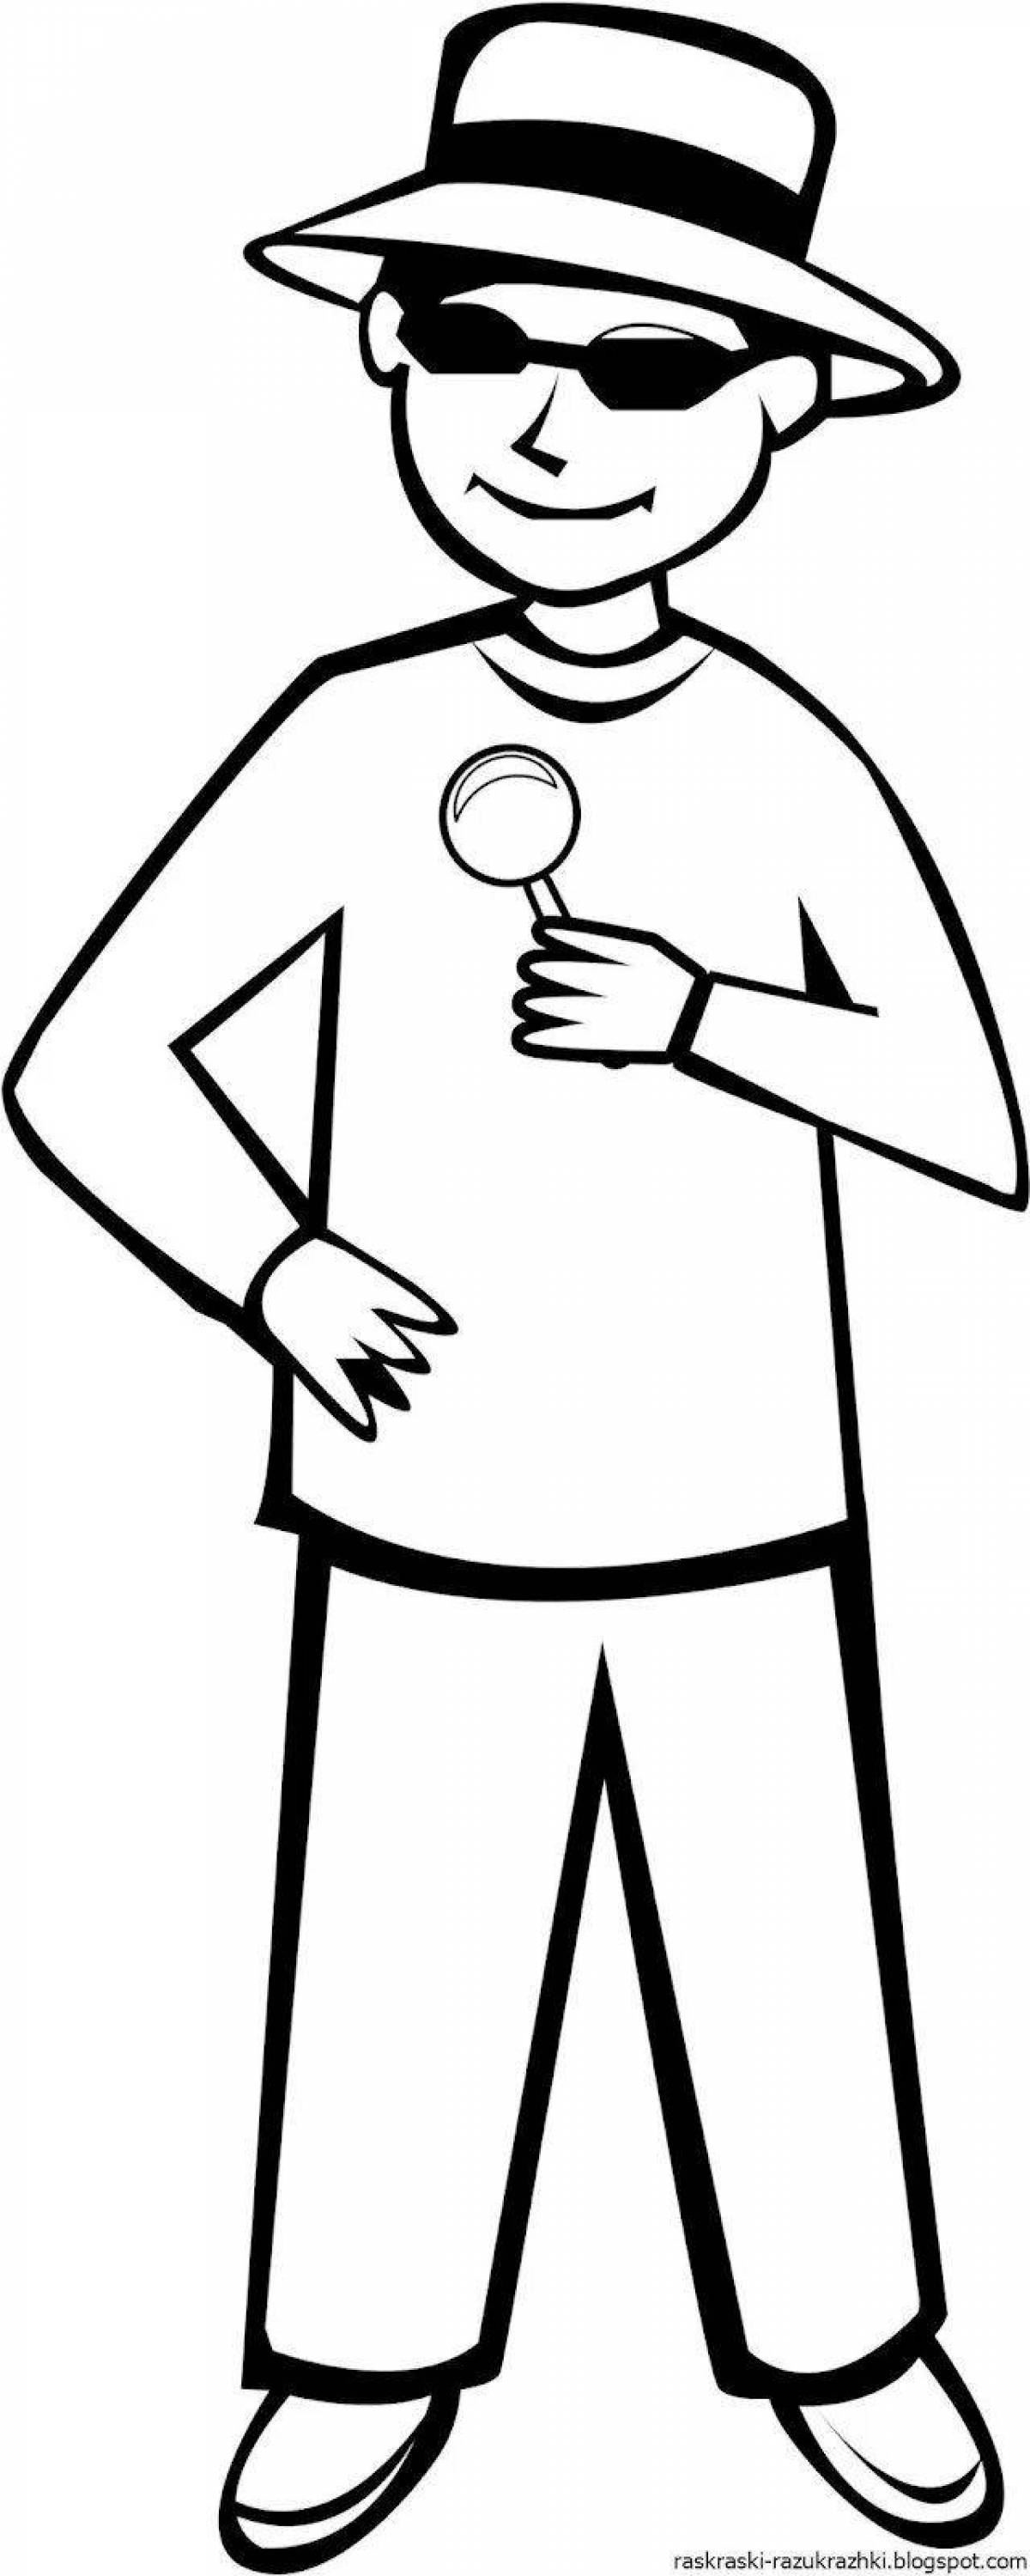 Playful human figure coloring page